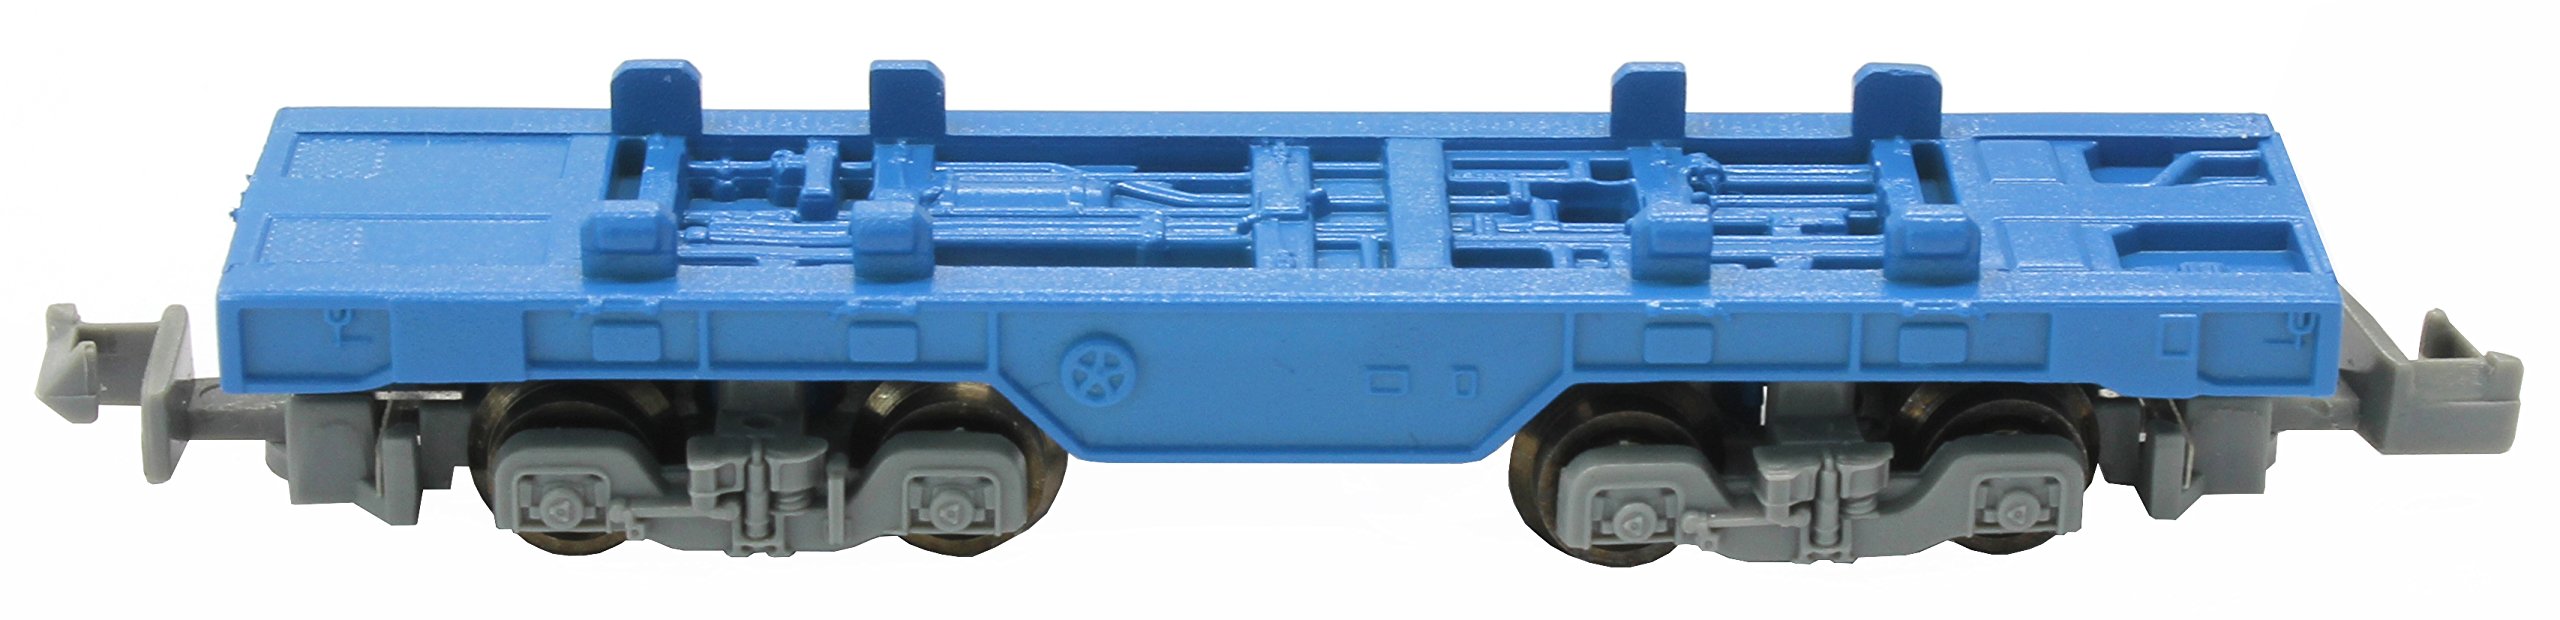 Rokuhan Z gauge Z Shorty Container Freight Car Blue SA006-1 Model Railroad Train_2